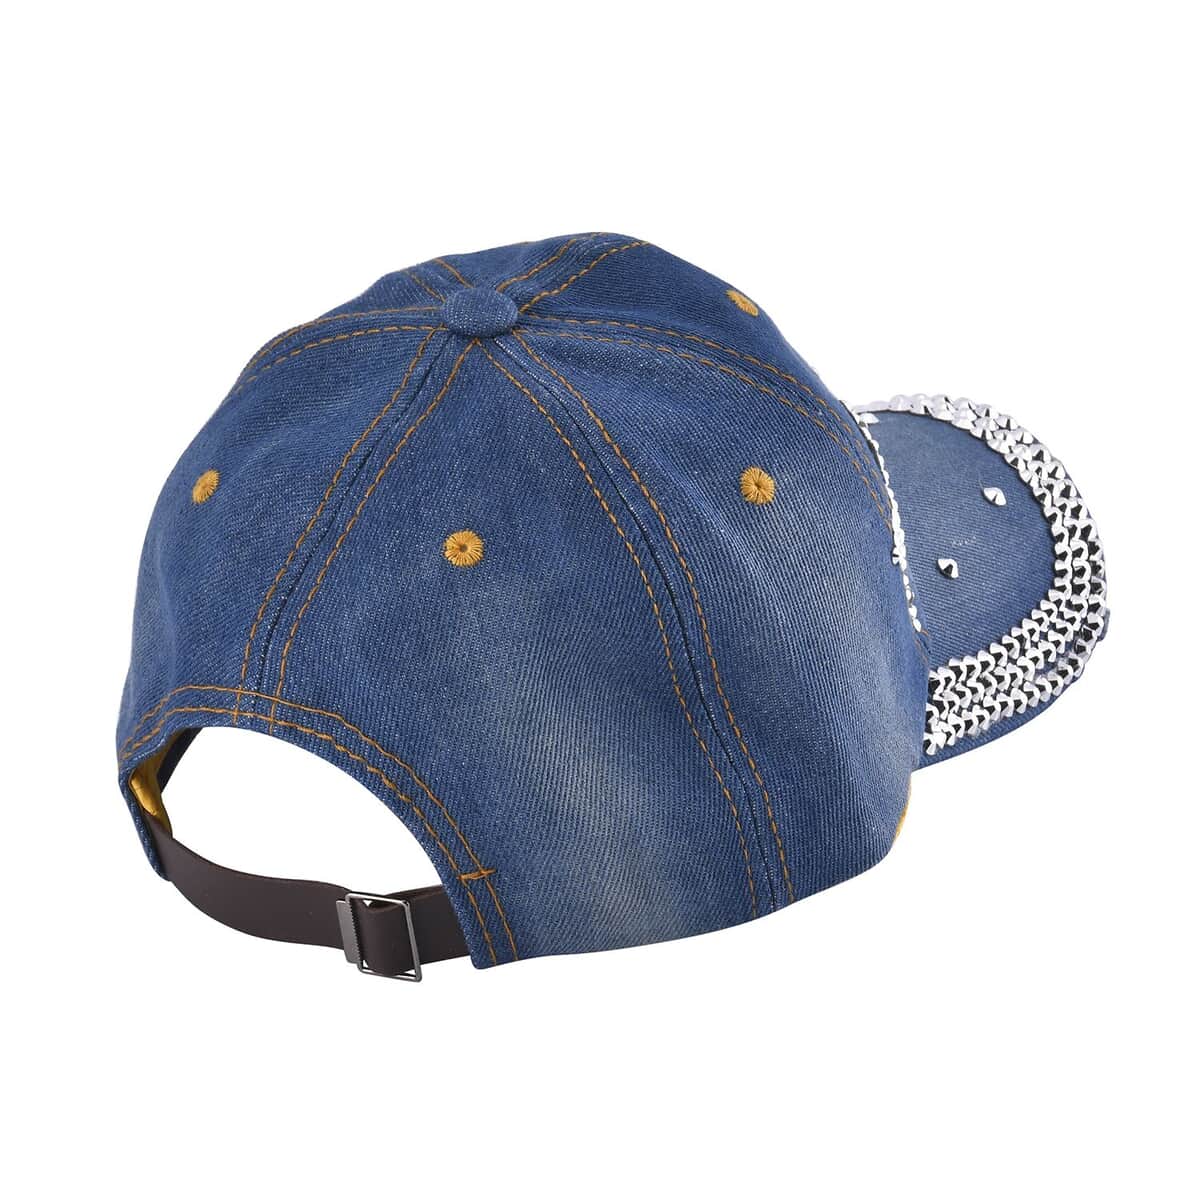 Shining Crystal and Star Cap with Velcro Fasteners (Adjustable Strap) - Blue image number 2